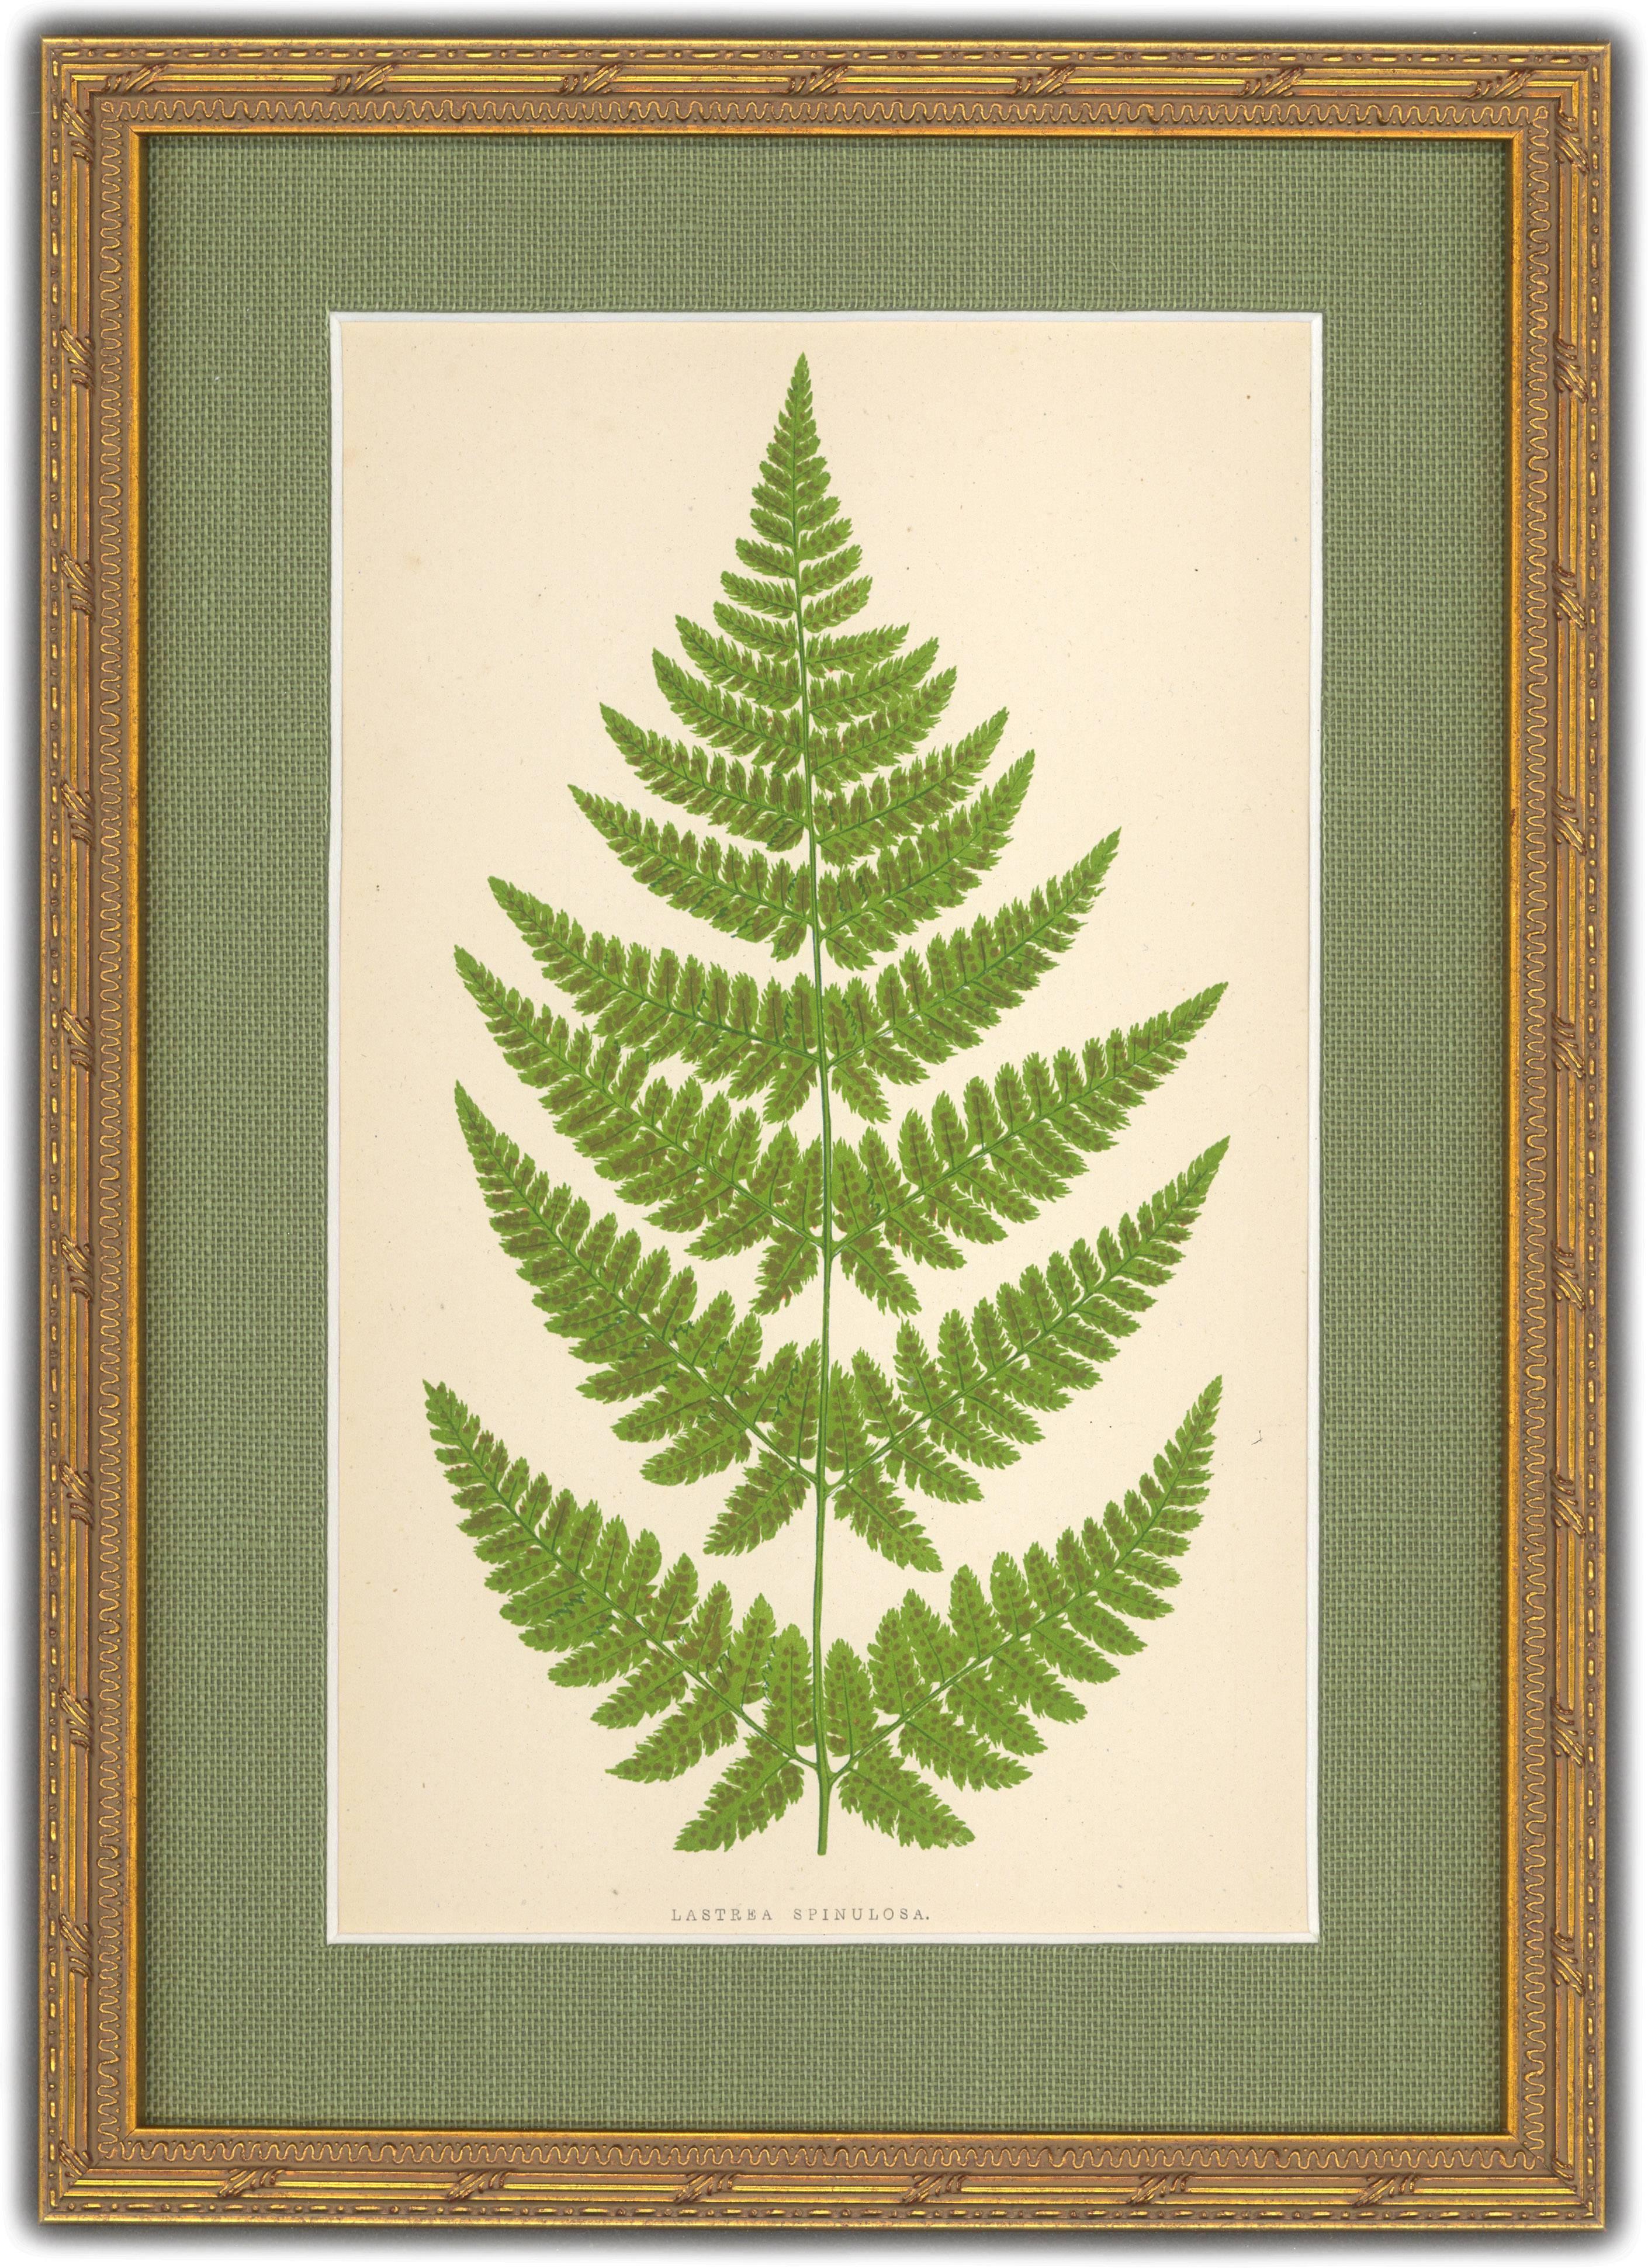 Polystichum Angulare and Lastrea Spinulosa - Brown Still-Life Print by Unknown